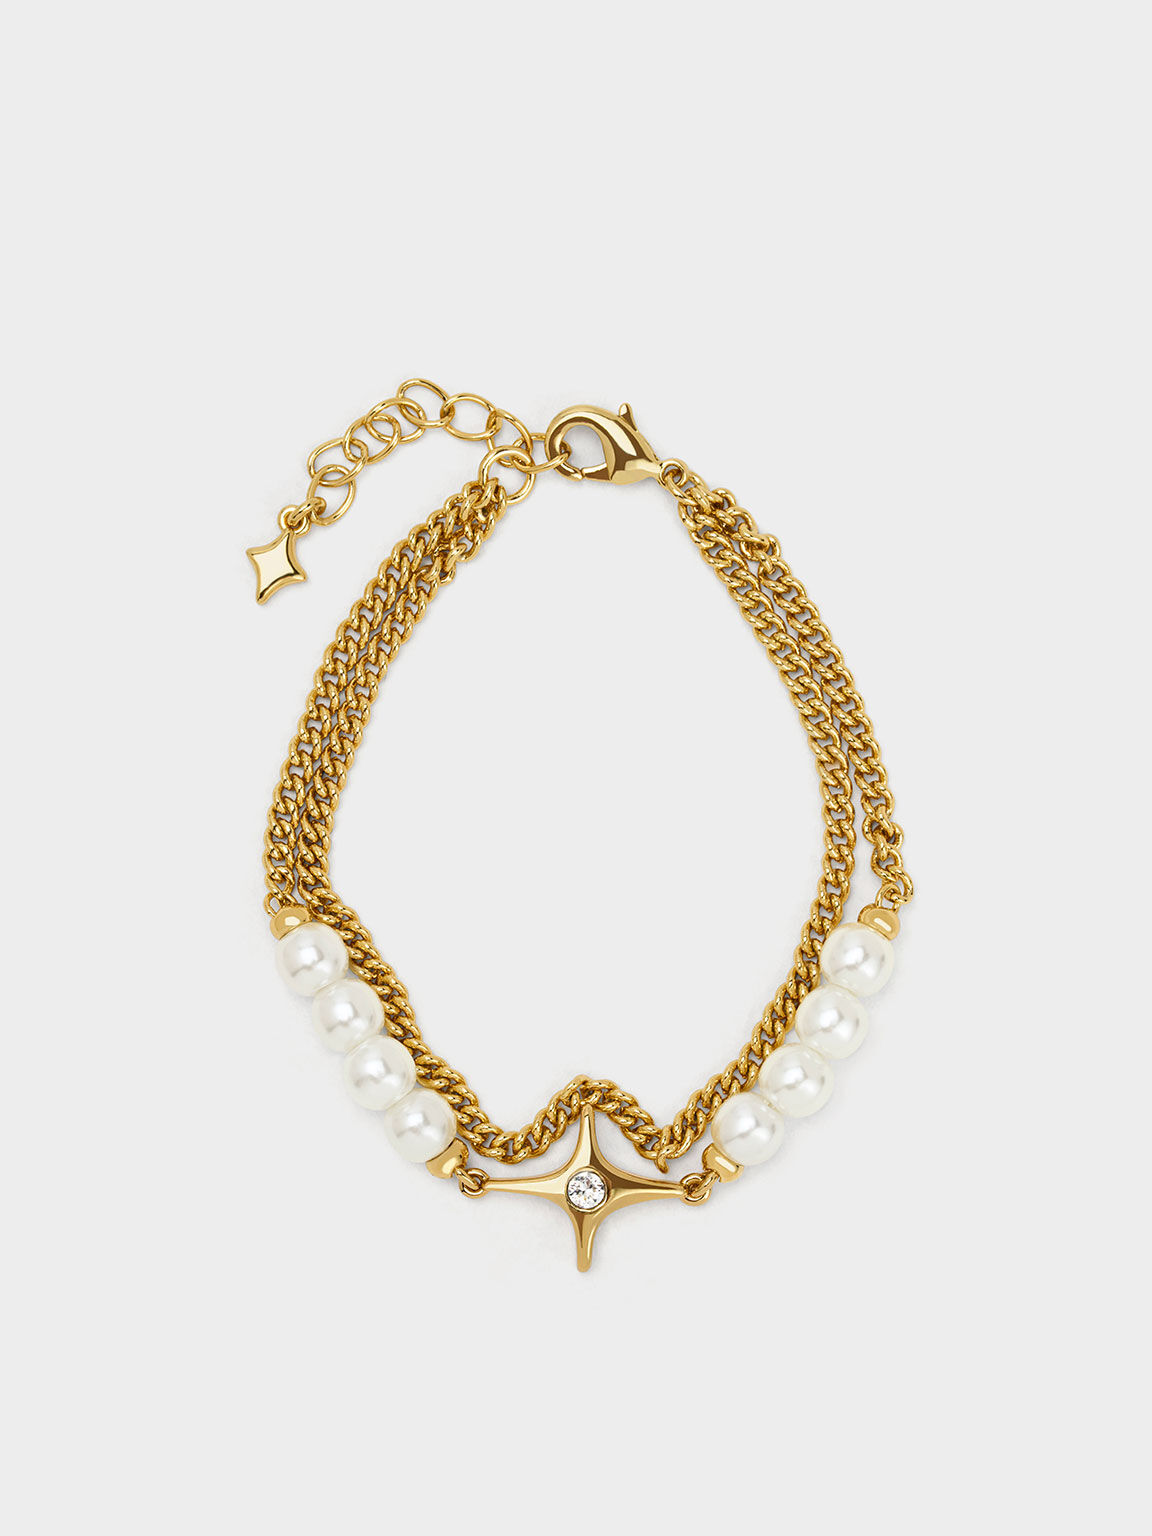 Star & Pearls Double Chain-Link Bracelet, Gold, hi-res